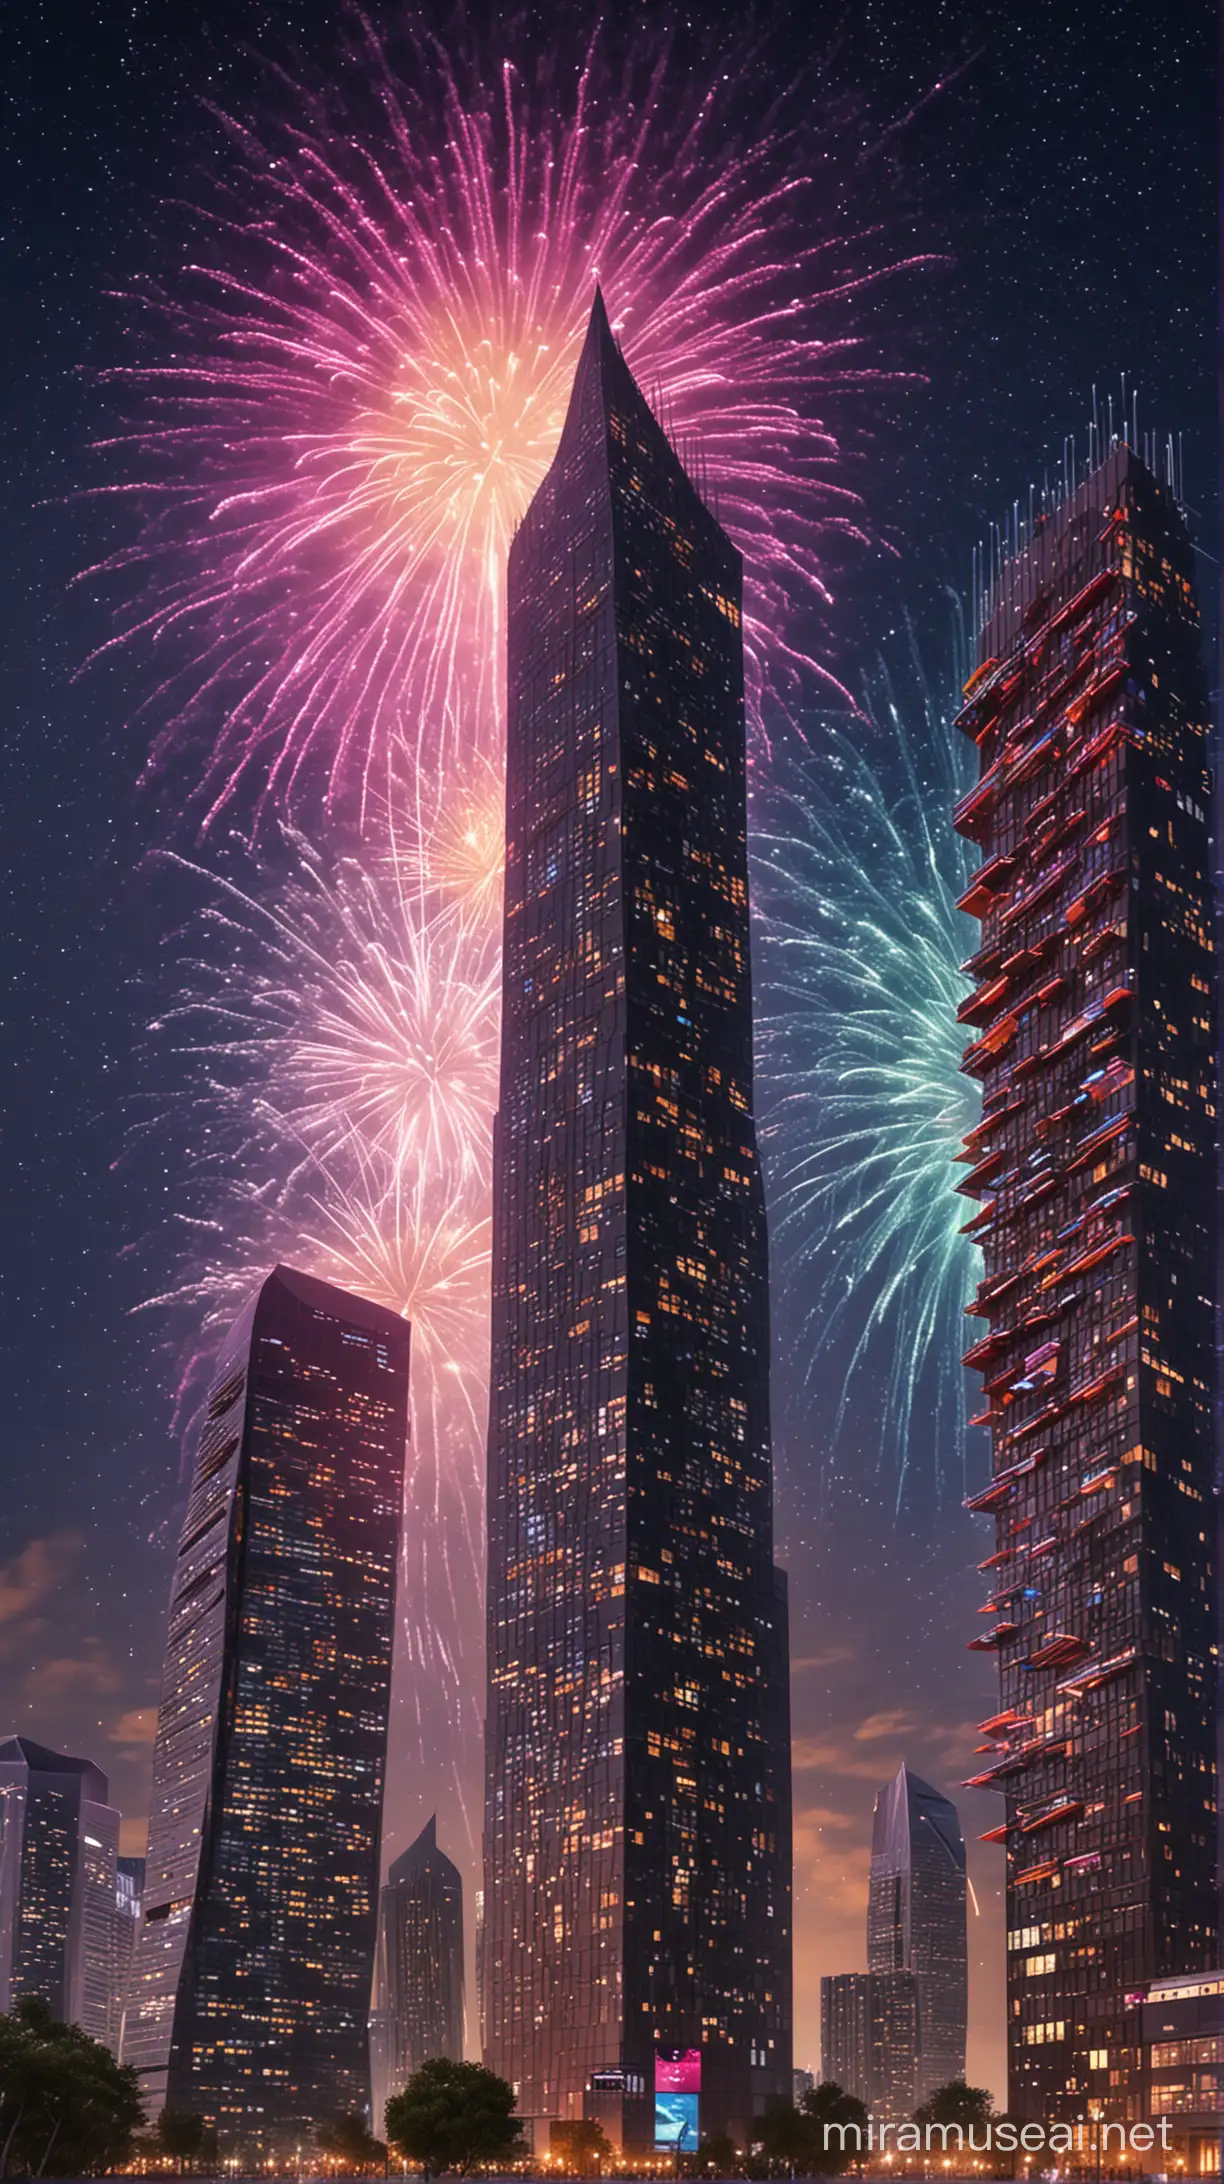 Vibrant Modern Towers Aglow with Fireworks Under a Starry Sky